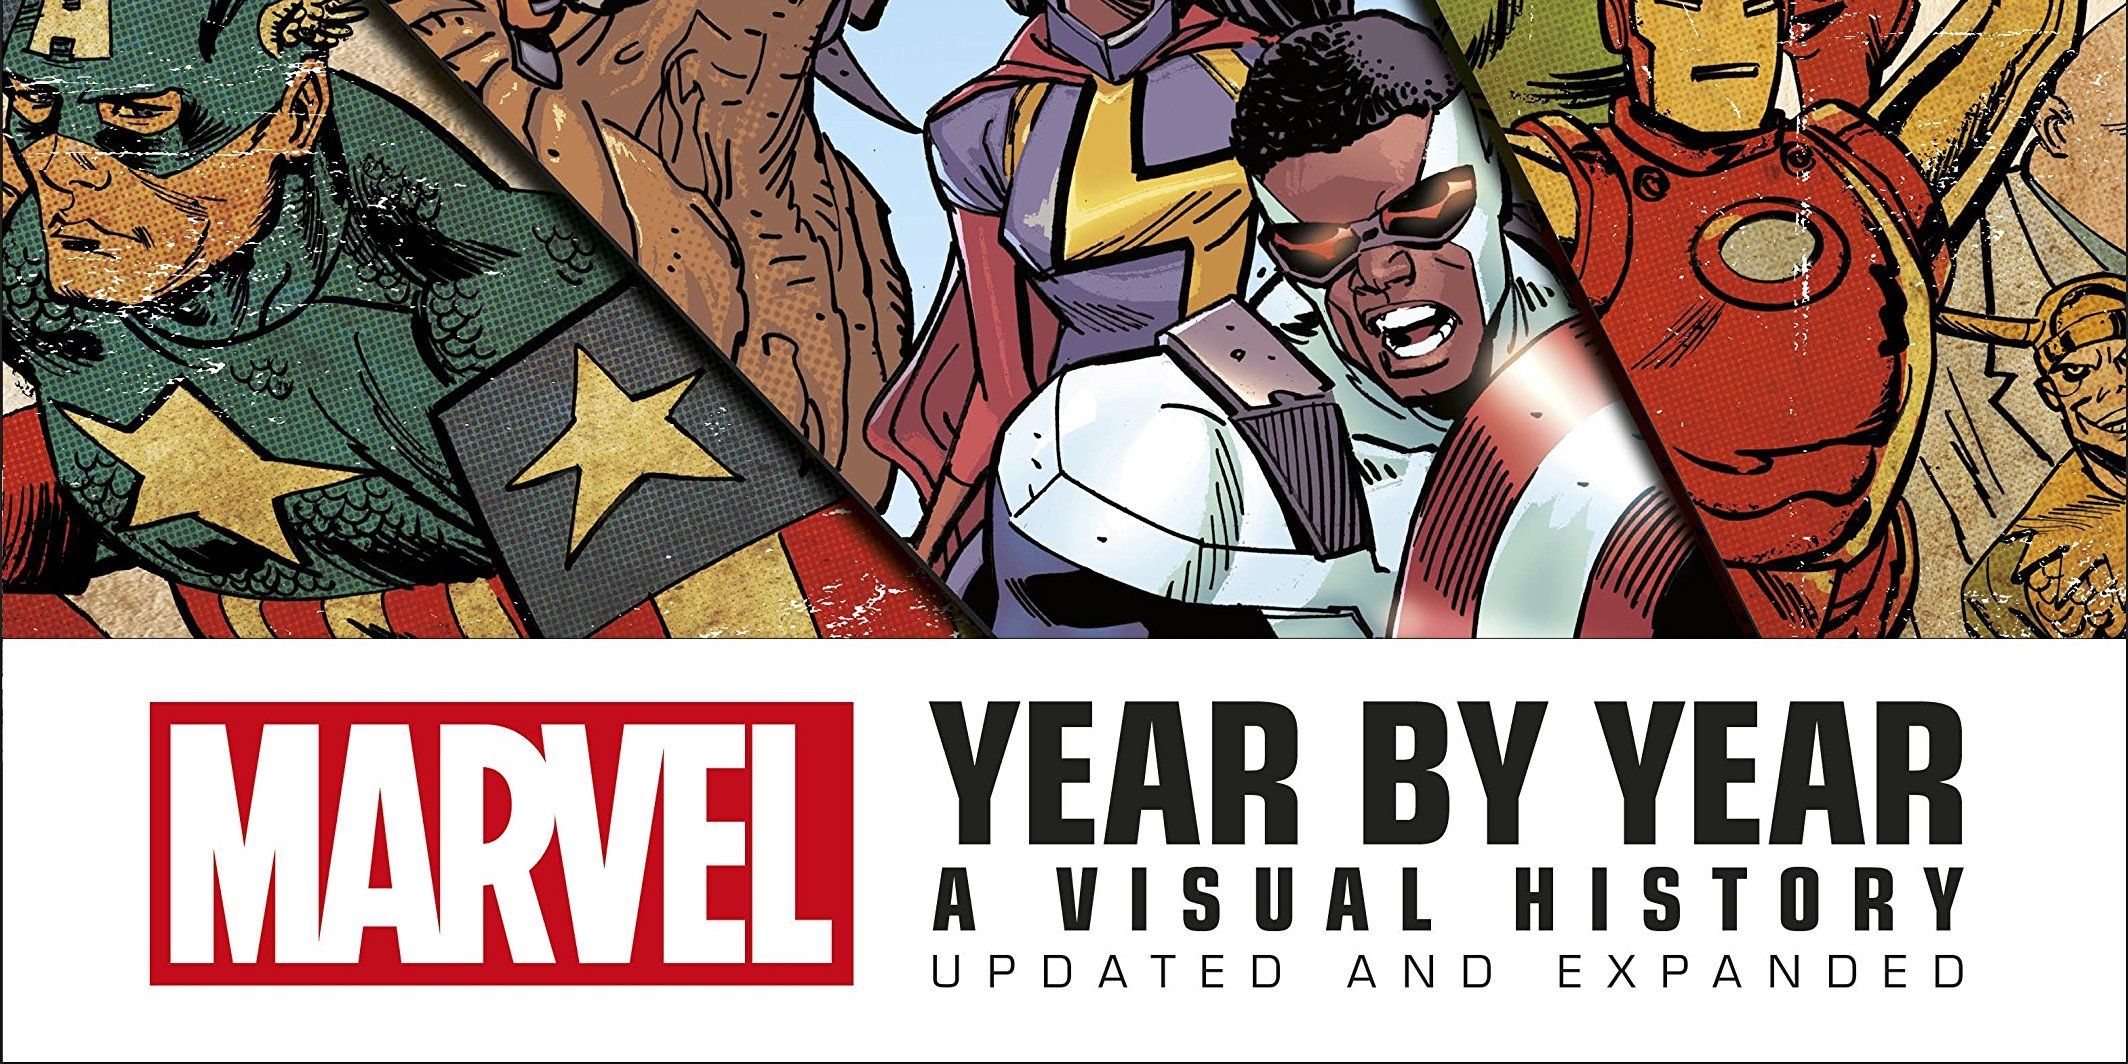 The cover of Marvel-Year-By-Year-Updated-And-Expanded-A-Visual-History